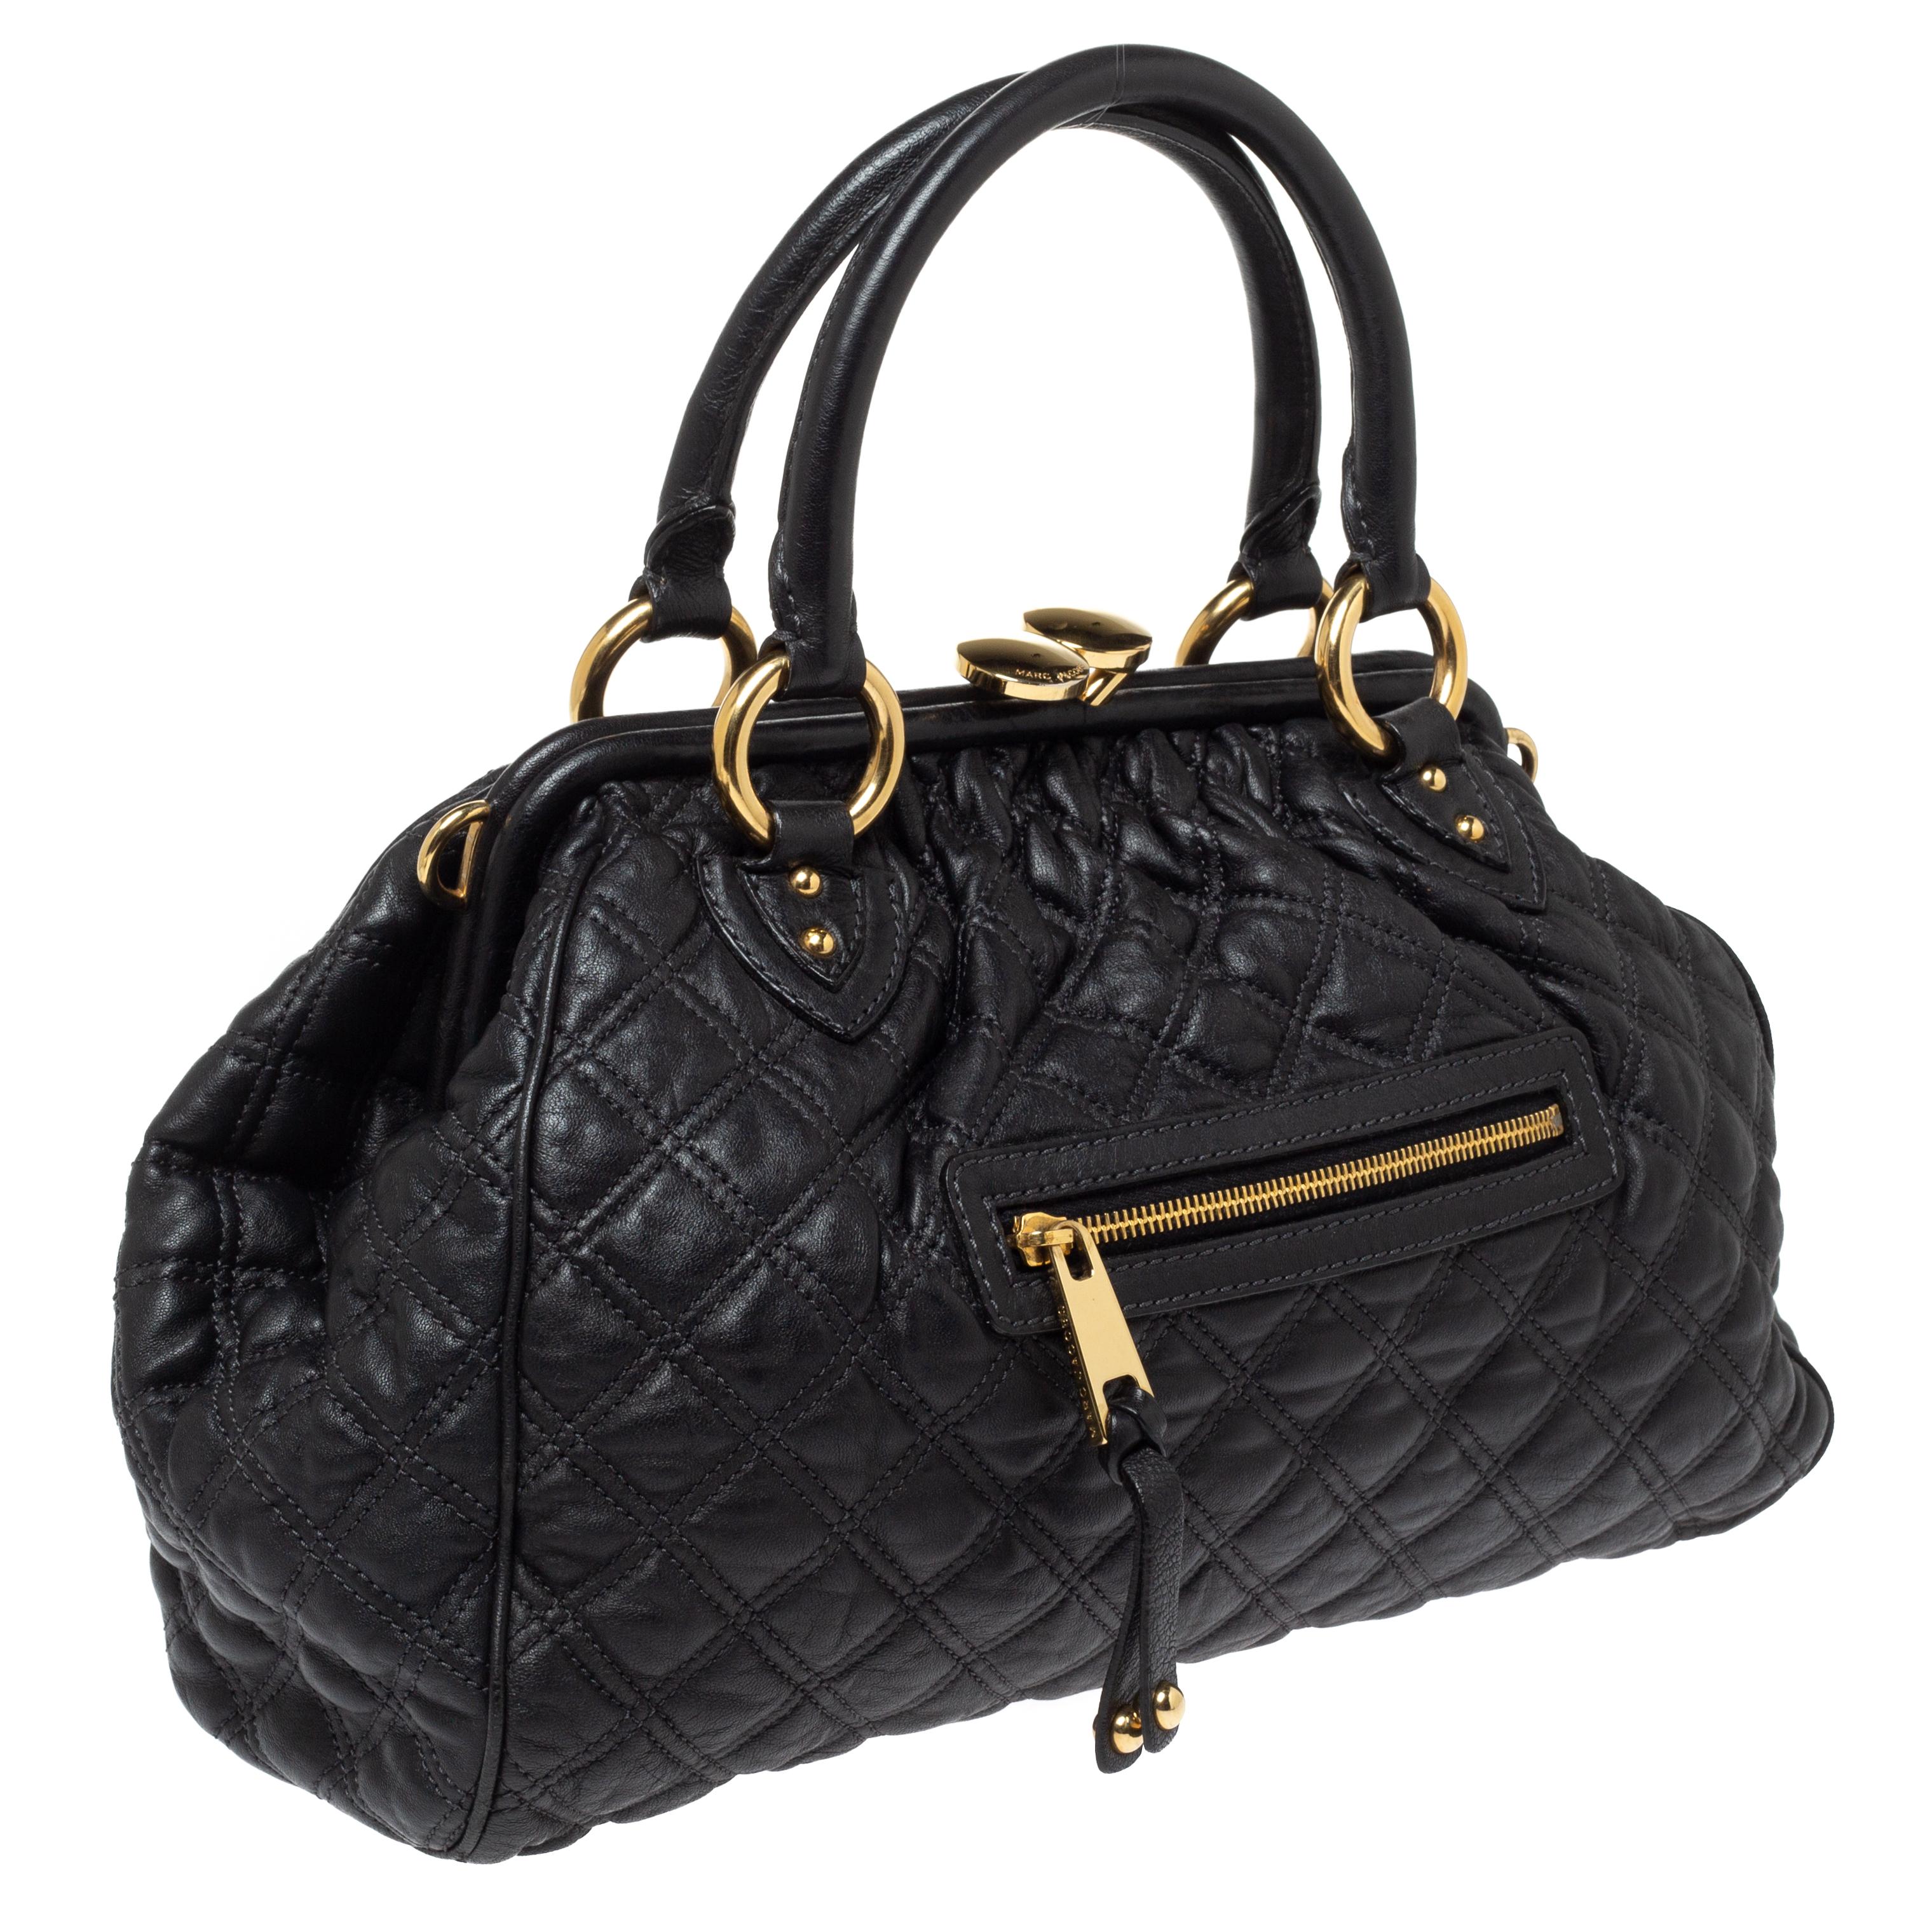 Women's Marc Jacobs Black Quilted Leather Stam Satchel